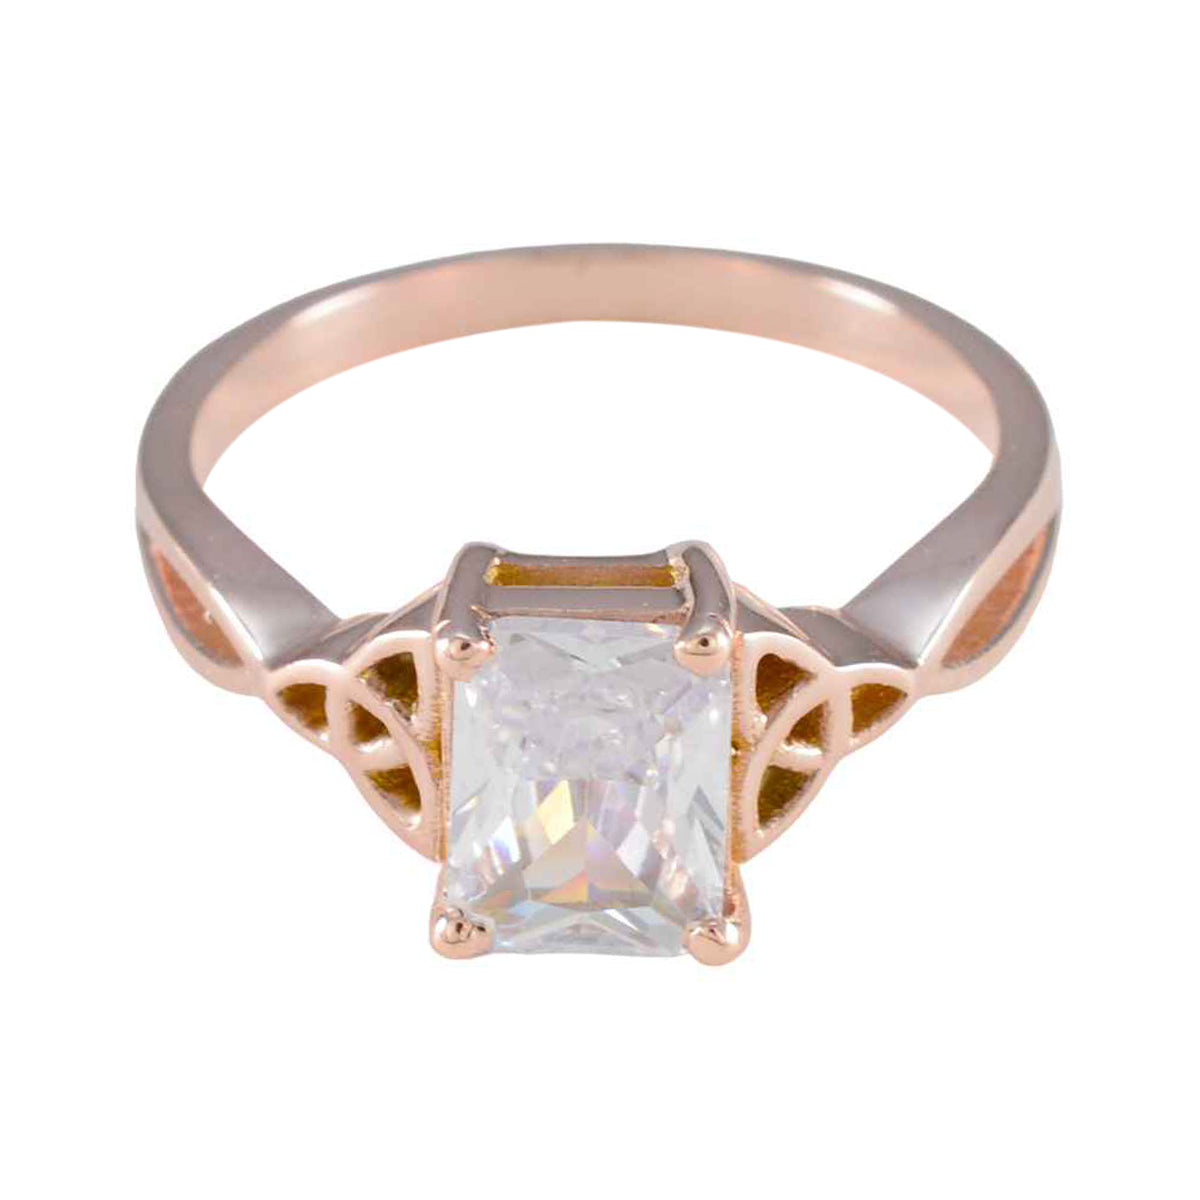 Riyo Gorgeous Silver Ring With Rose Gold Plating White CZ Stone Octagon Shape Prong Setting Custom Jewelry Christmas Ring